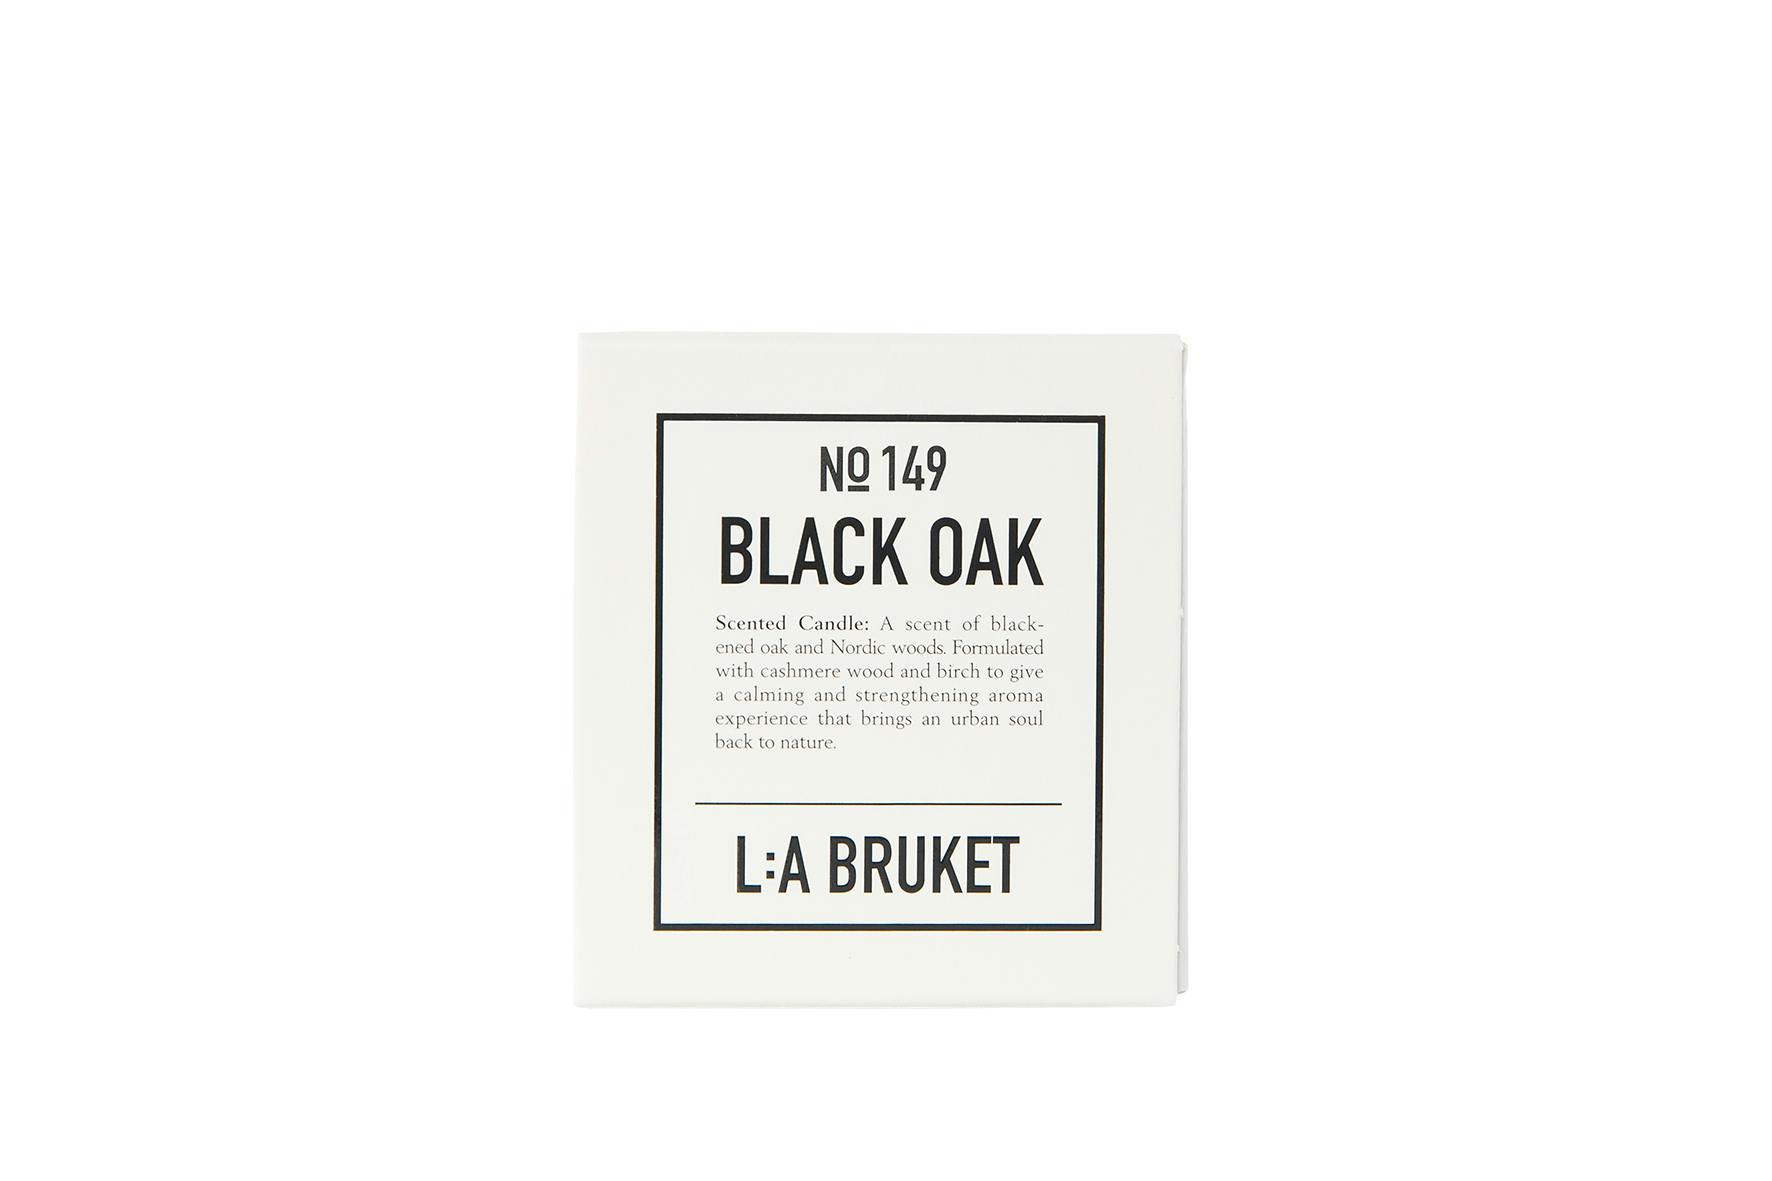 L:A Bruket candle, Swedish gifts. vegan candle, black oak, natural candles, organic, Nordic style, travel candles